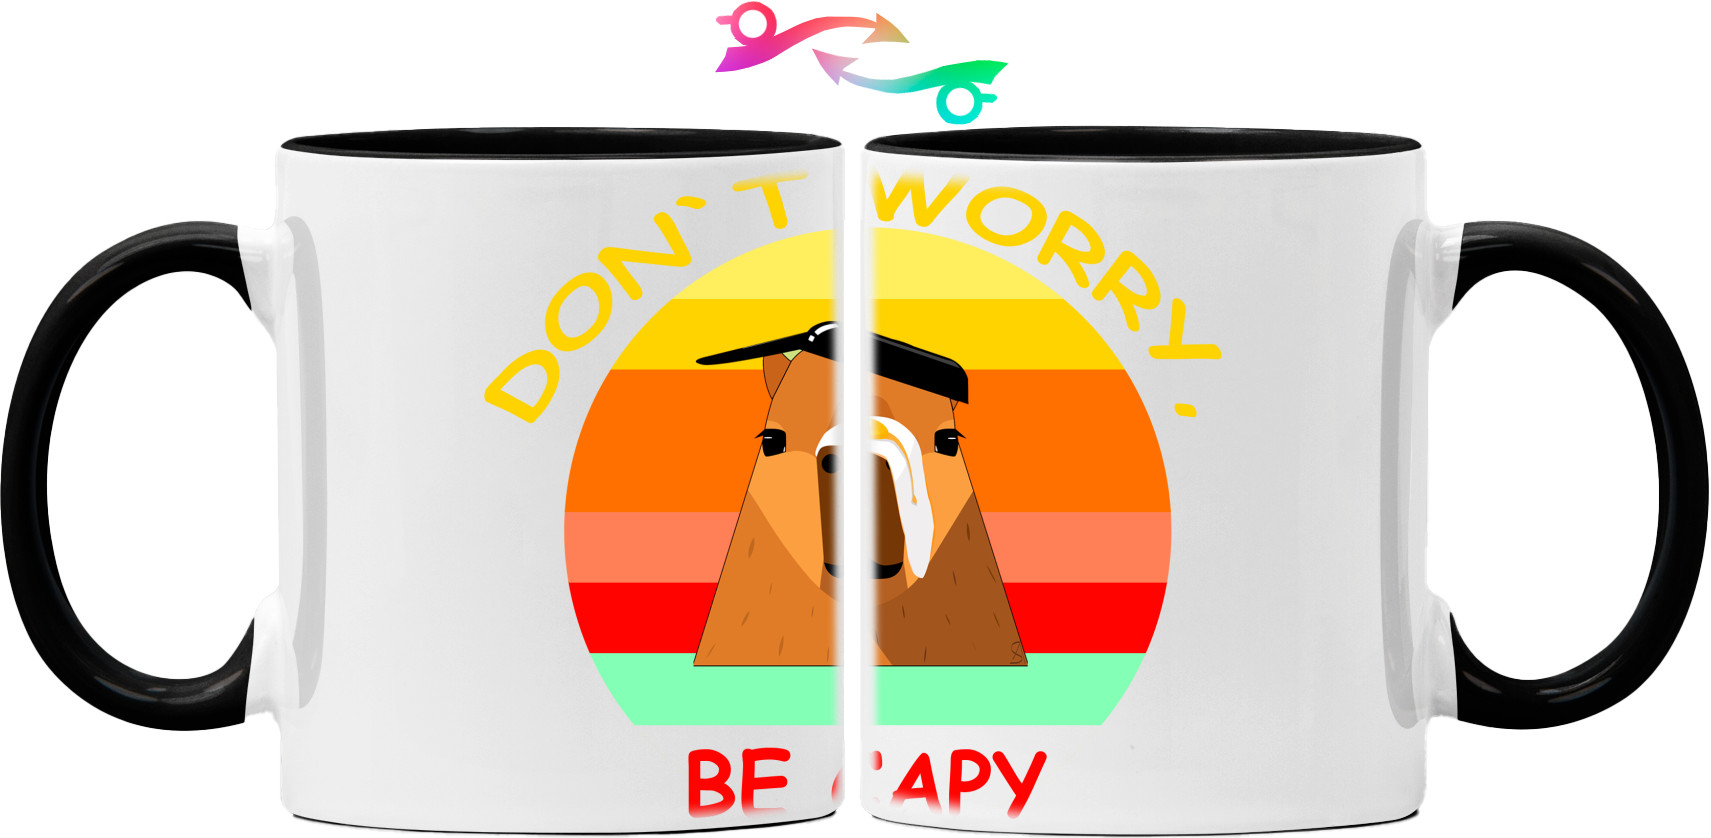 Don't Worry, Be Capy